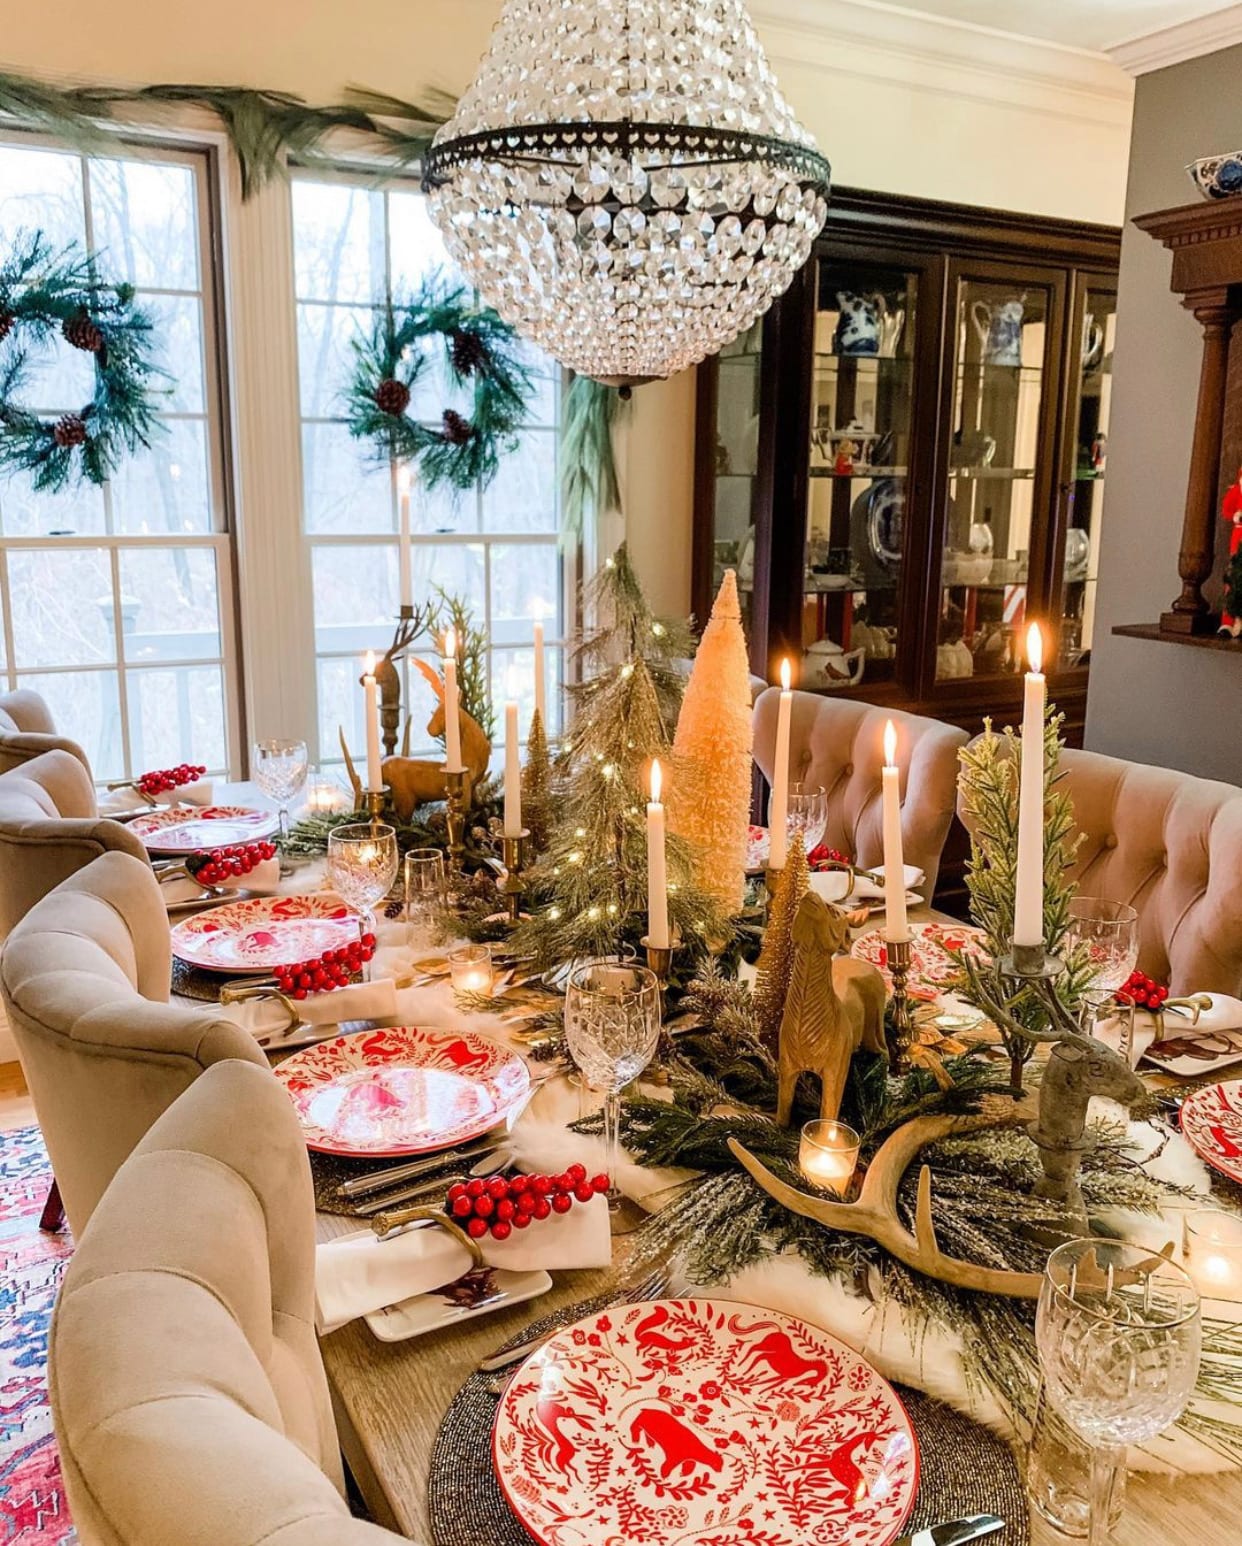 Creating a Magical Holiday Table Setting - Karr Bick Kitchen & Bath